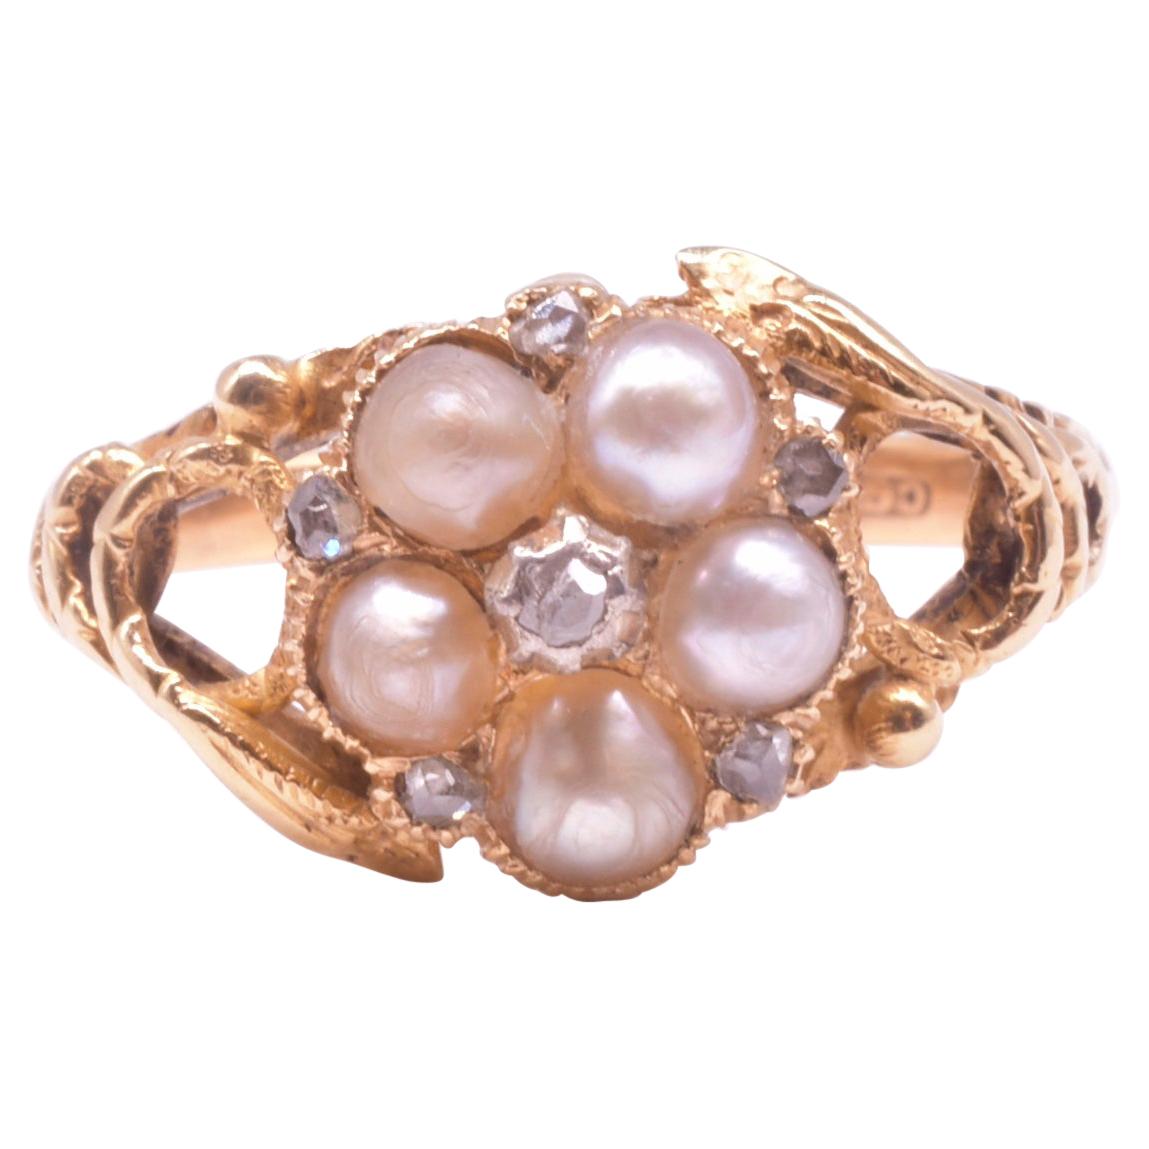 Hallmarked 1913 Pearl and Diamond Forget Me Not Ring with Serpent Shoulders